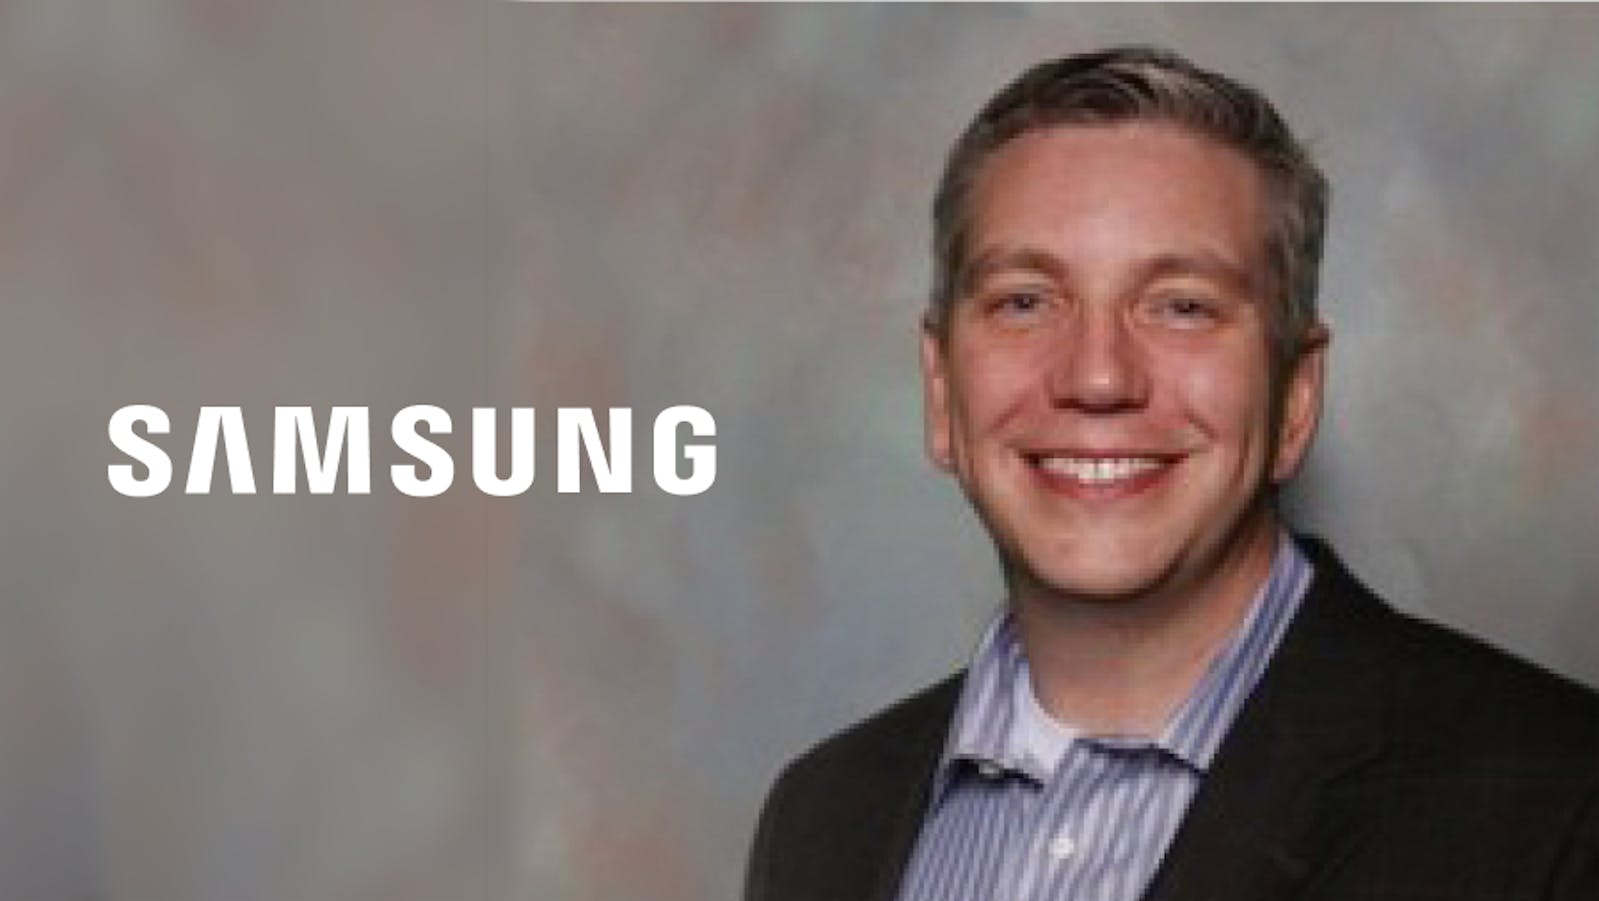  Featured image: Ed Billmaier, Samsung US: From last year to this year, we’ve grown sales by 10x - Read full post: Ed Billmaier, Samsung US: From last year to this year, we’ve grown sales by 10x